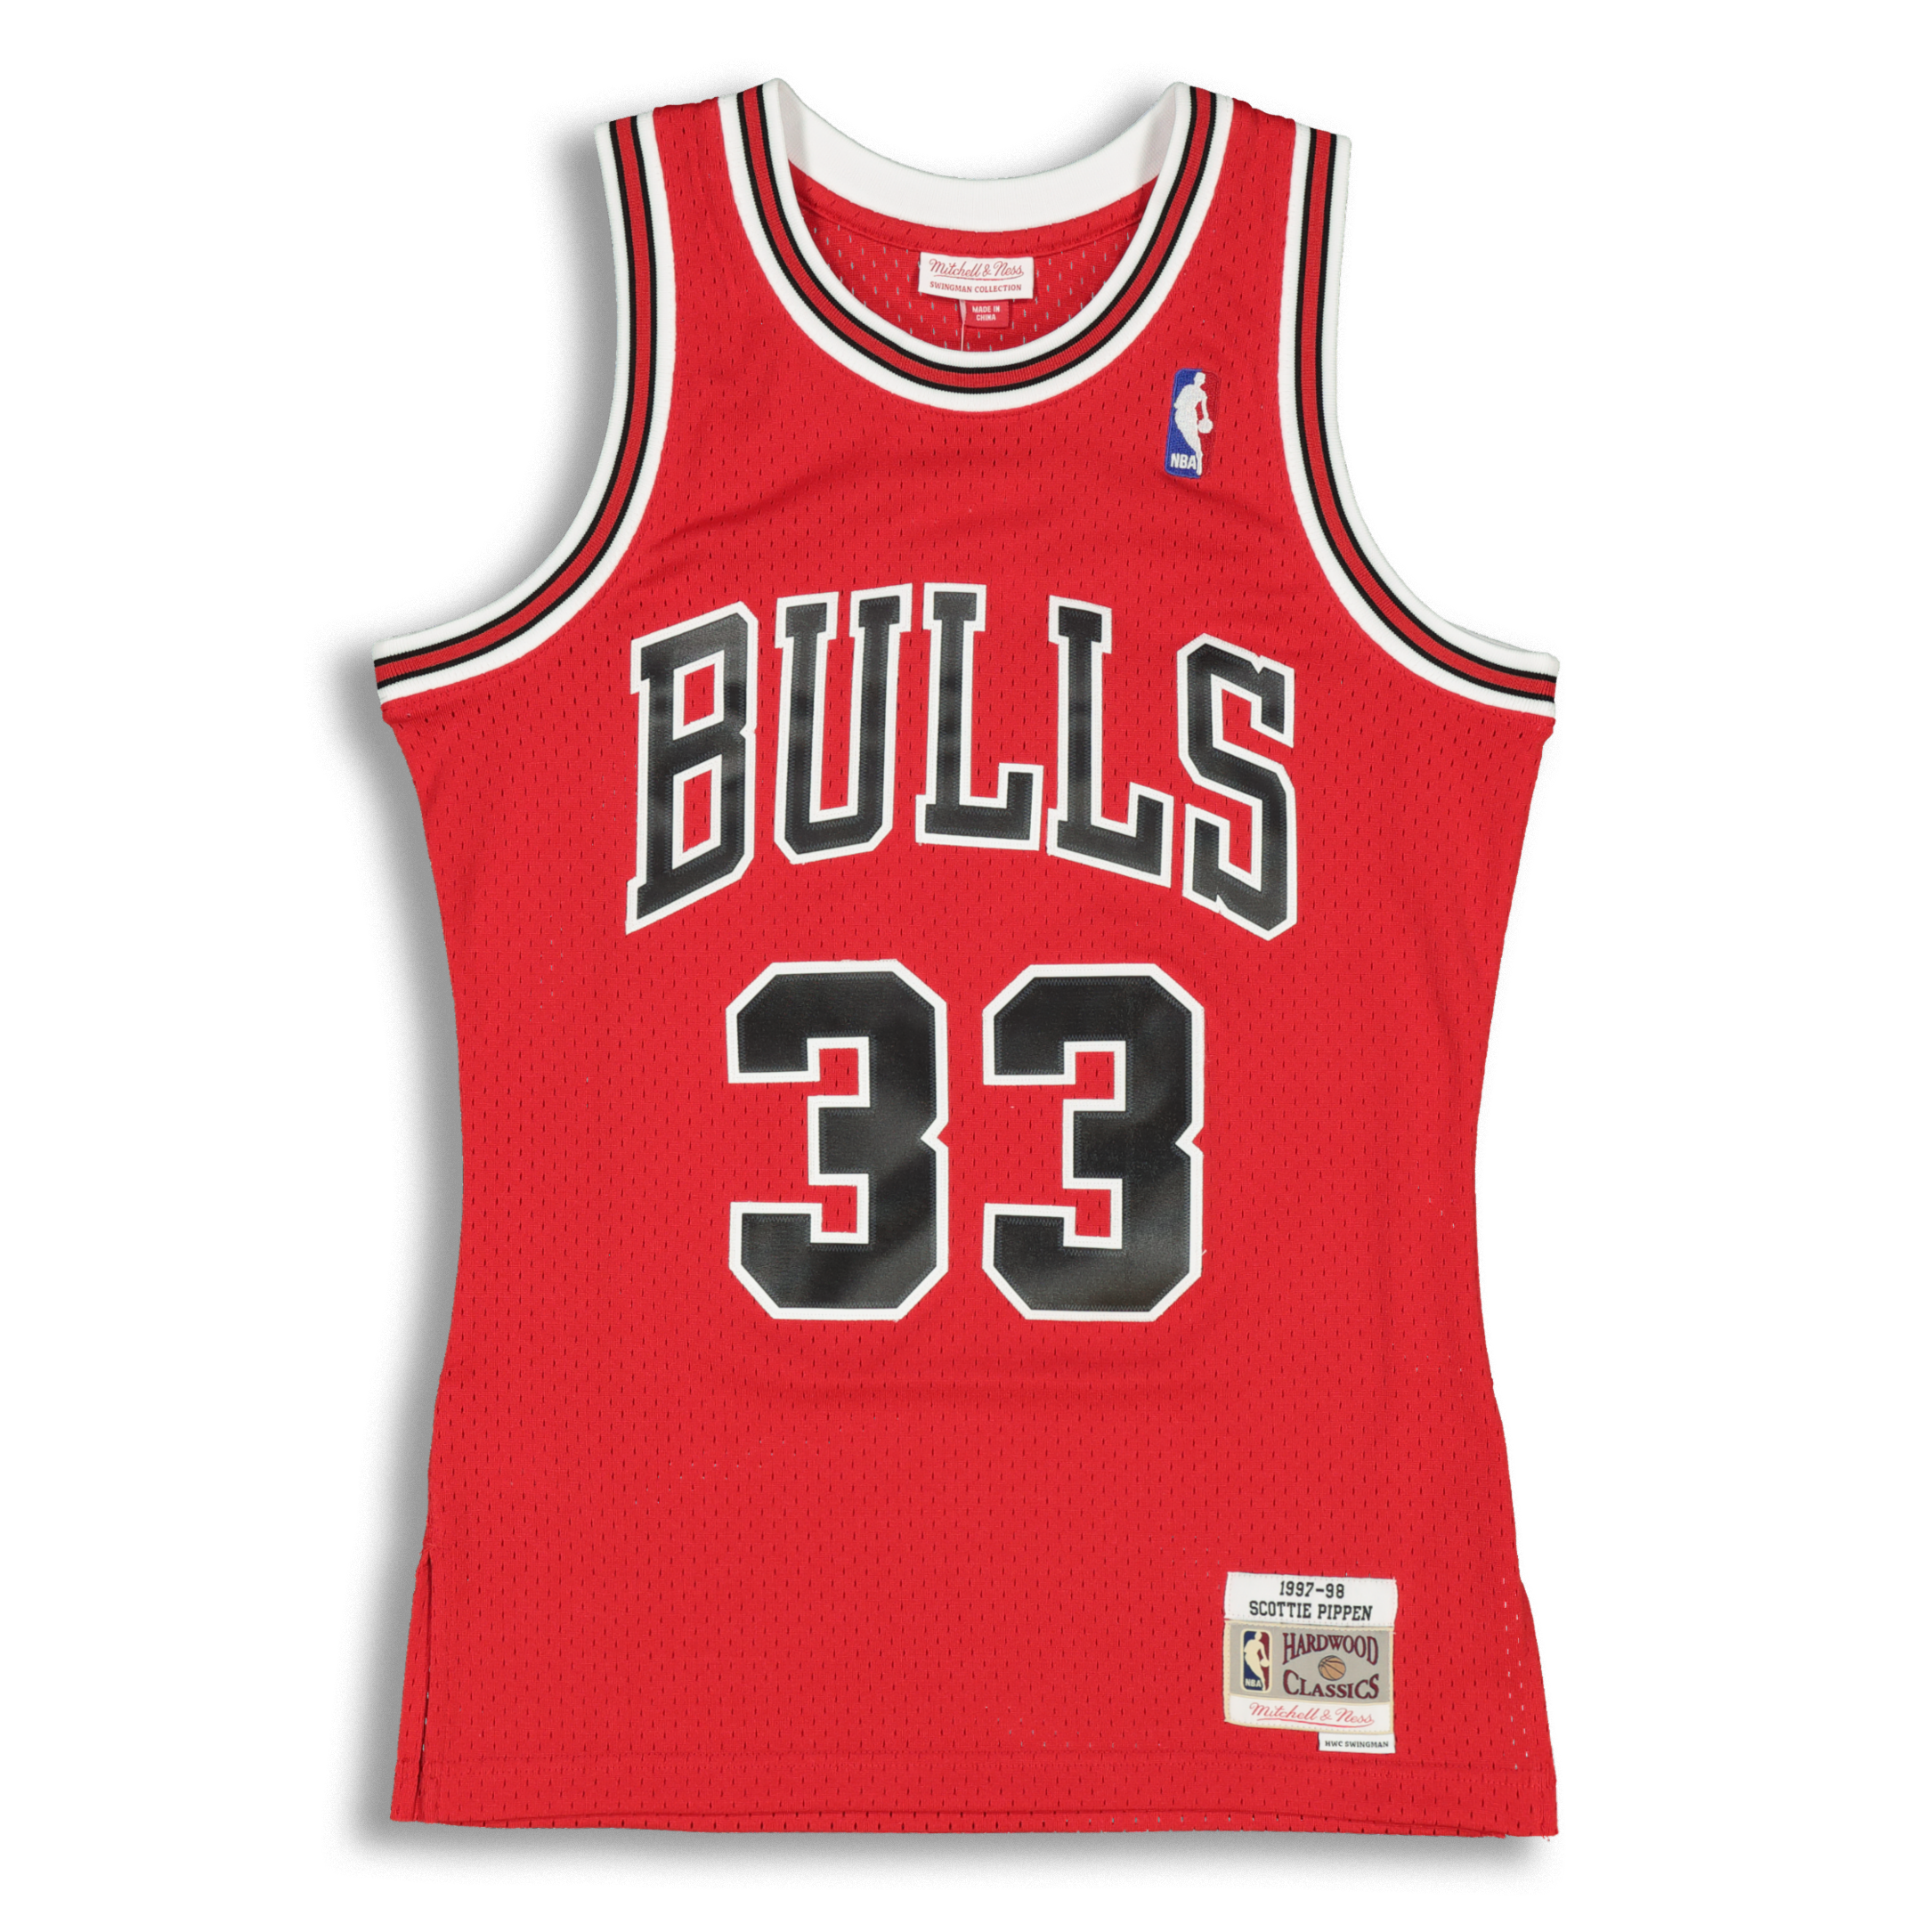 pippen jersey red